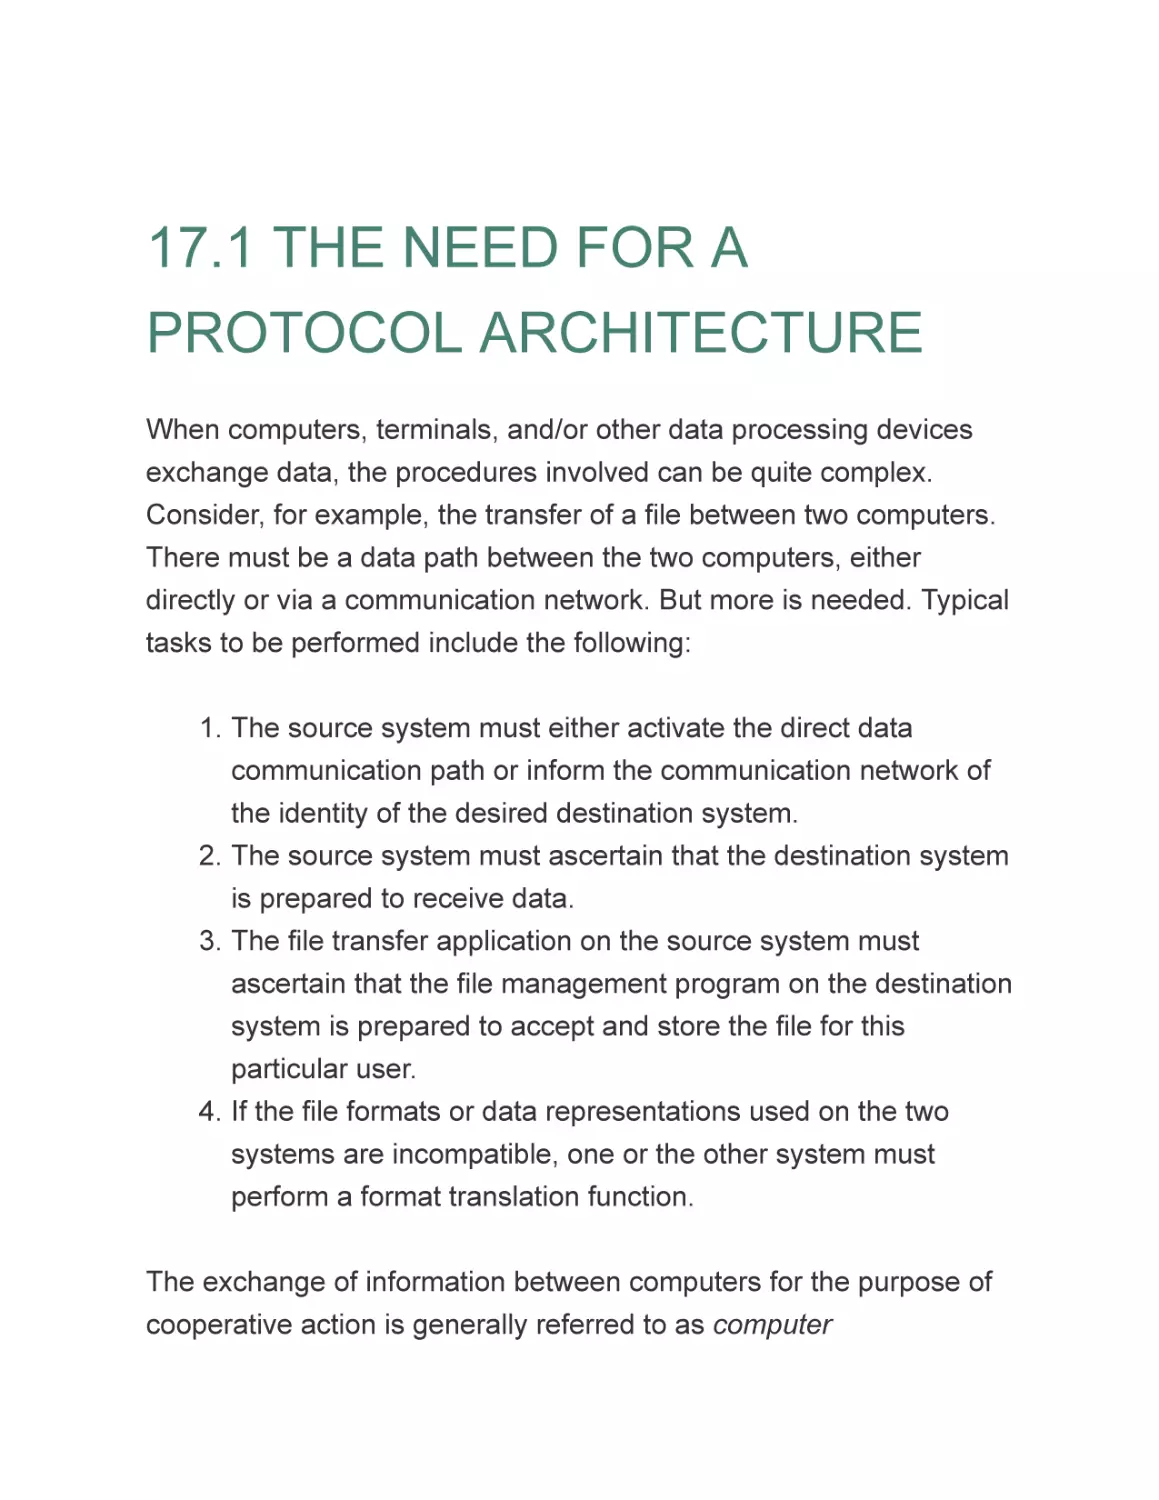 17.1 THE NEED FOR A PROTOCOL ARCHITECTURE